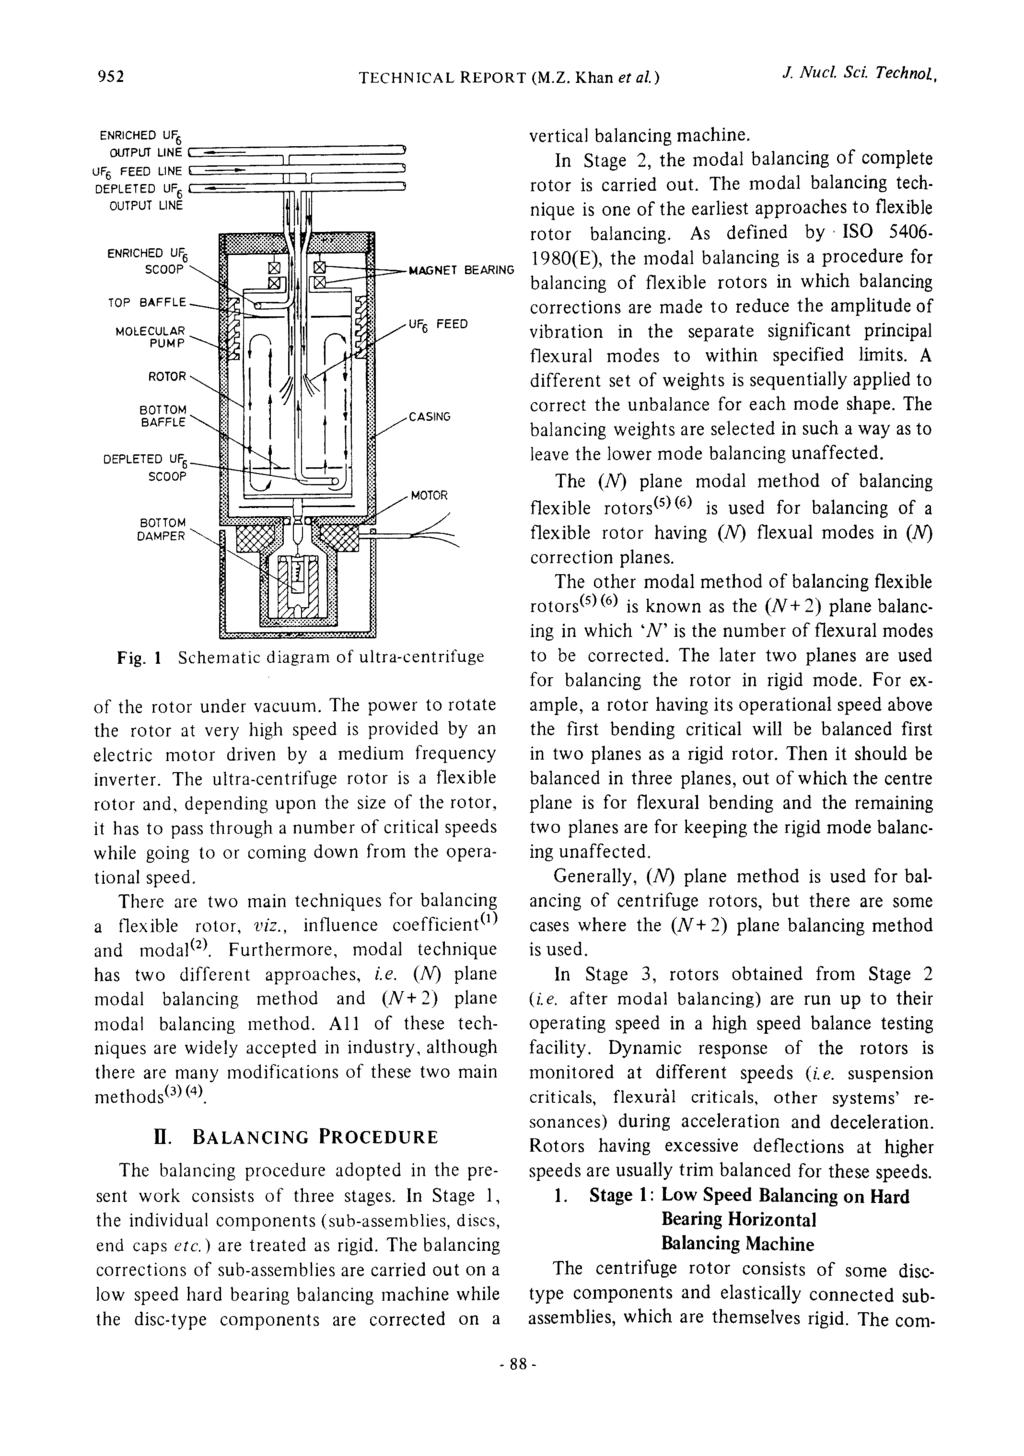 952 TECHNICAL REPORT (M.Z. Khan et al.) J. Nucl. Sci. Technol., Fig. 1 Schematic diagram of ultra-centrifuge of the rotor under vacuum.